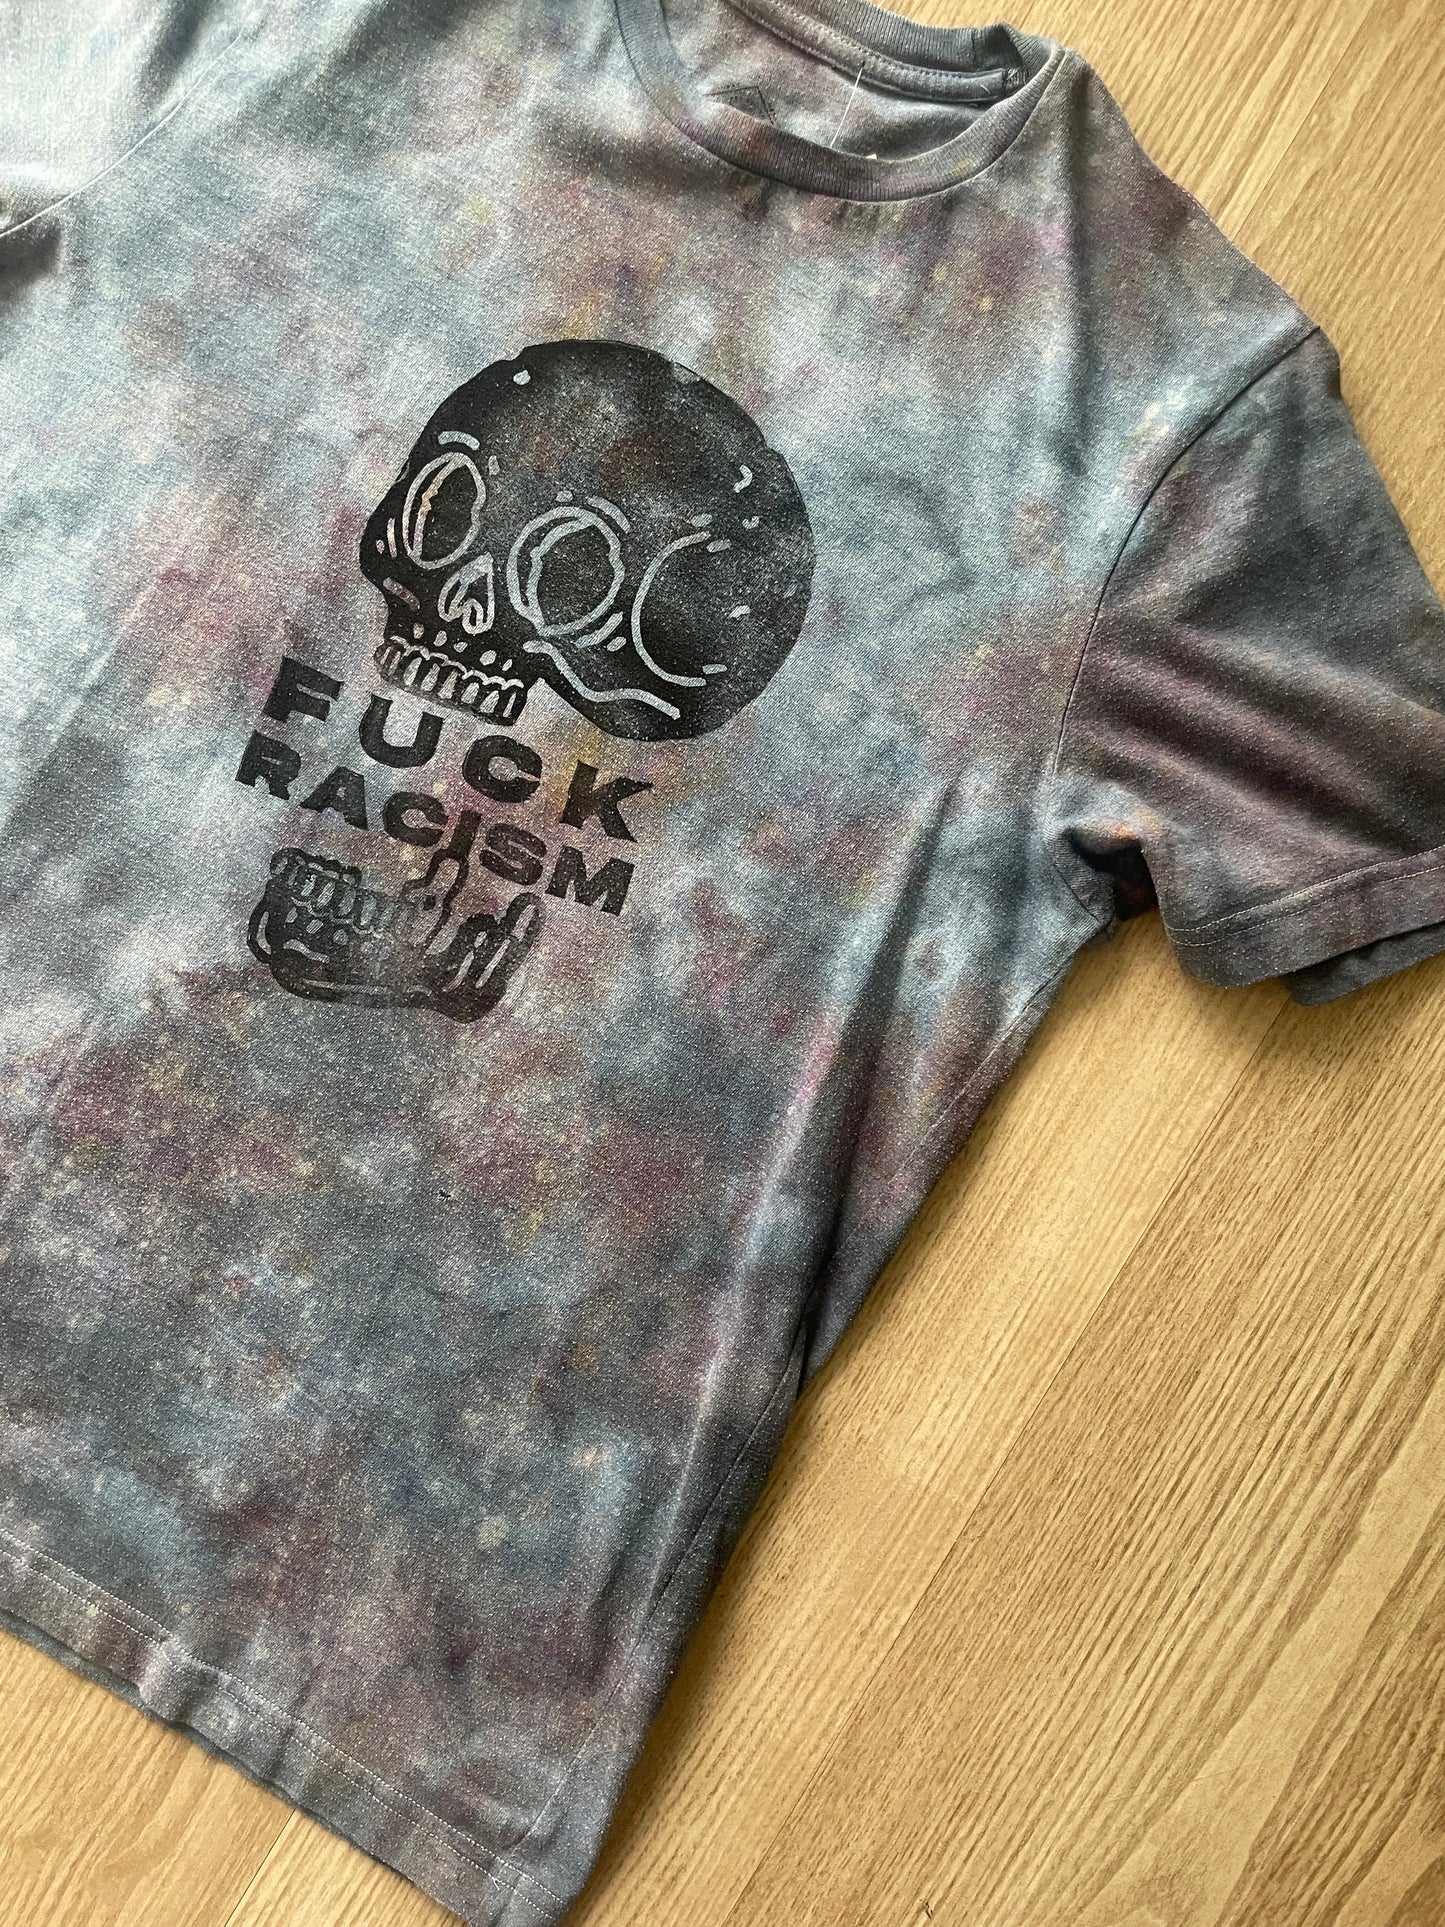 Small Men's Hand-Printed Fuck Racism Skull Galaxy Tie Dye Short Sleeve T-Shirt | Handmade One-Of-a-Kind Upcycled Black and Gray Top